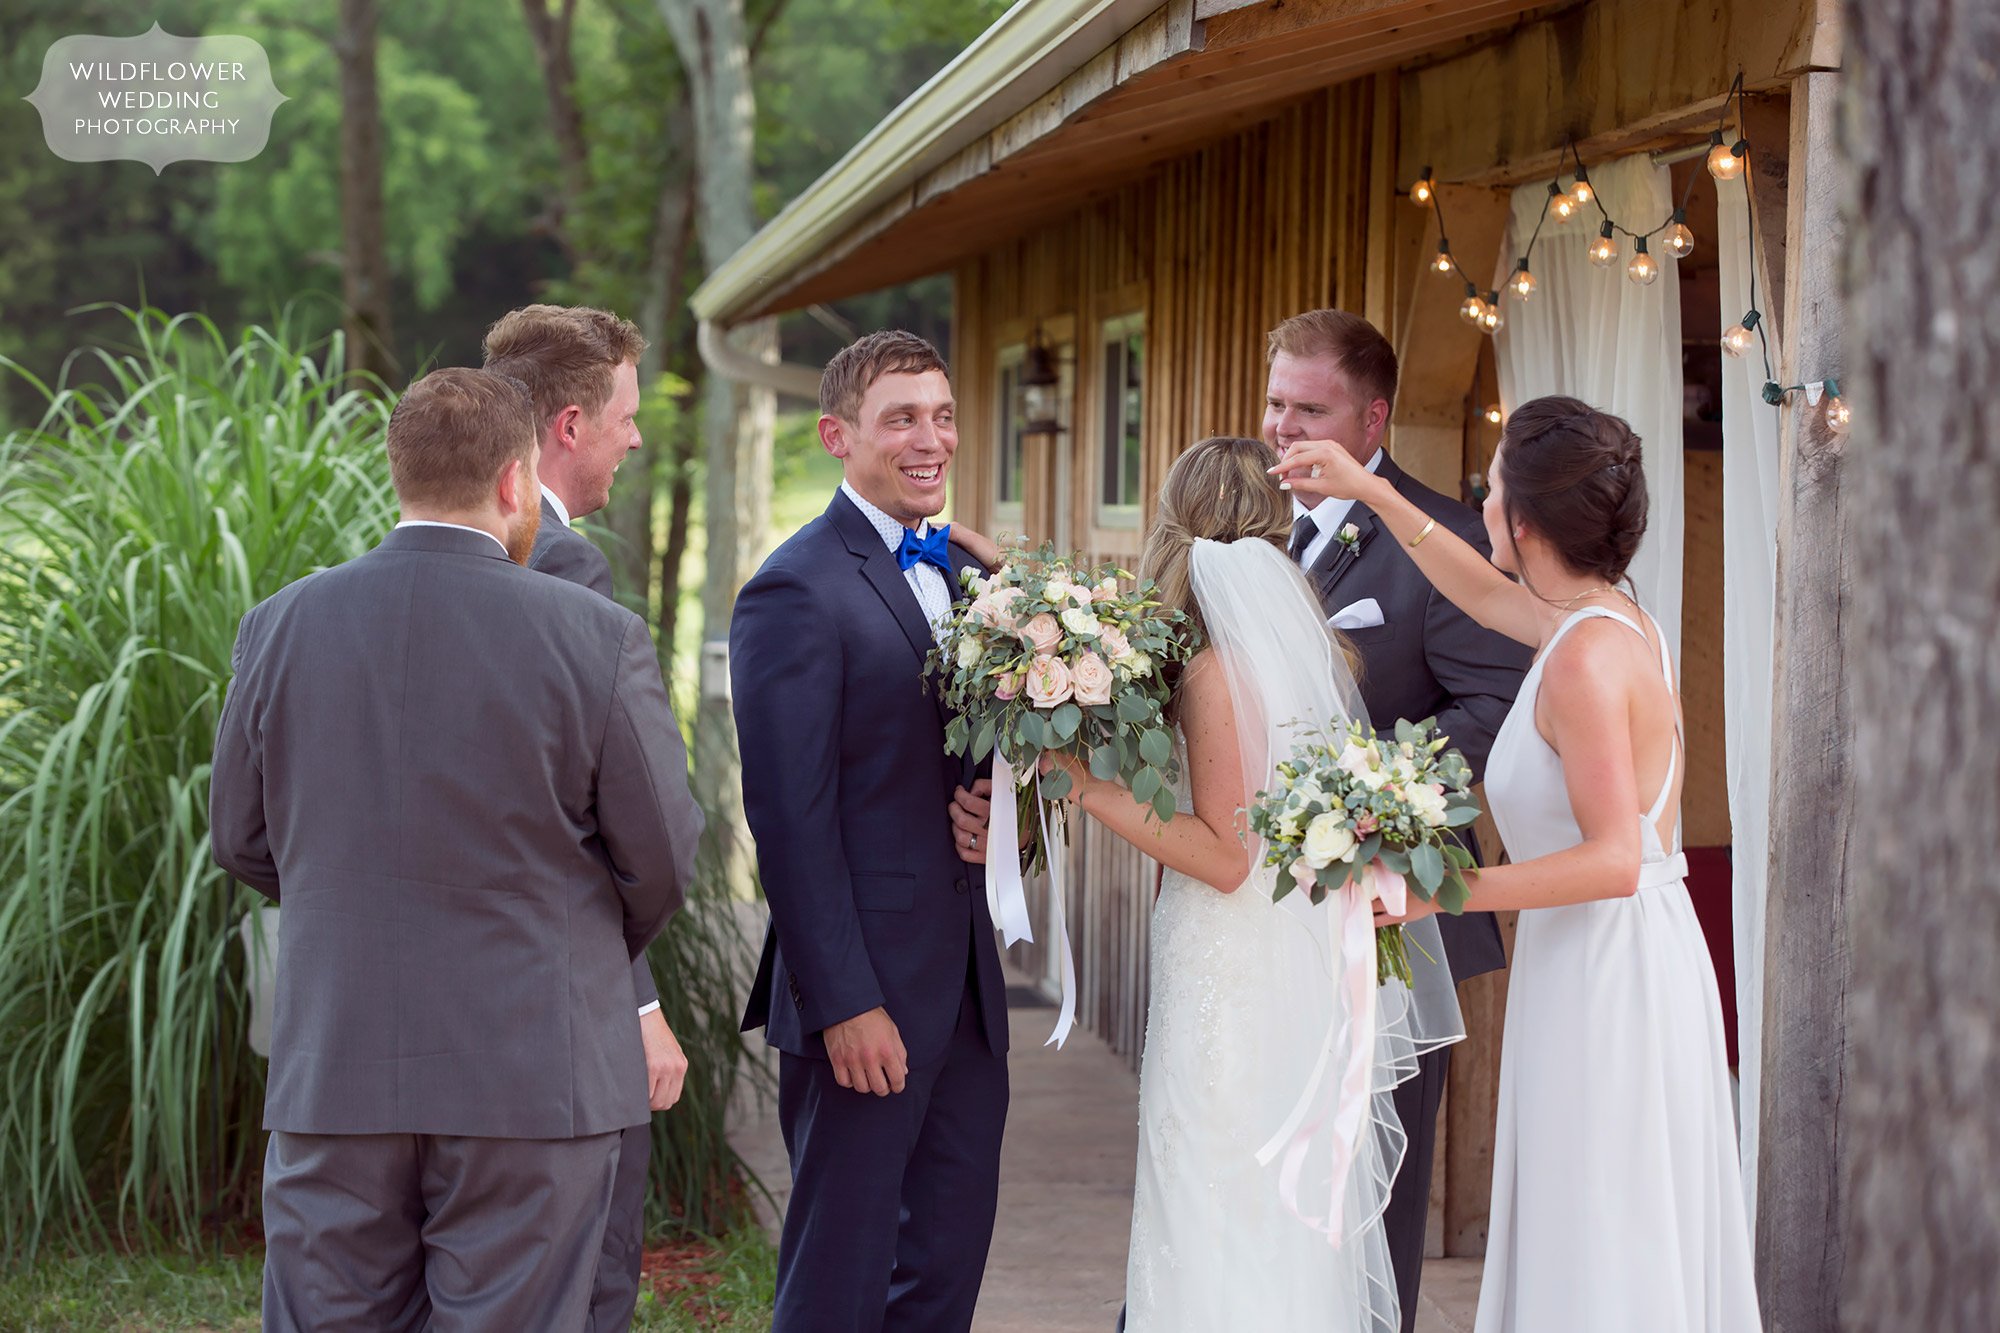 Such a happy photo of the bride and groom's friends congratulating them after the wedding ceremony at Kempker's.